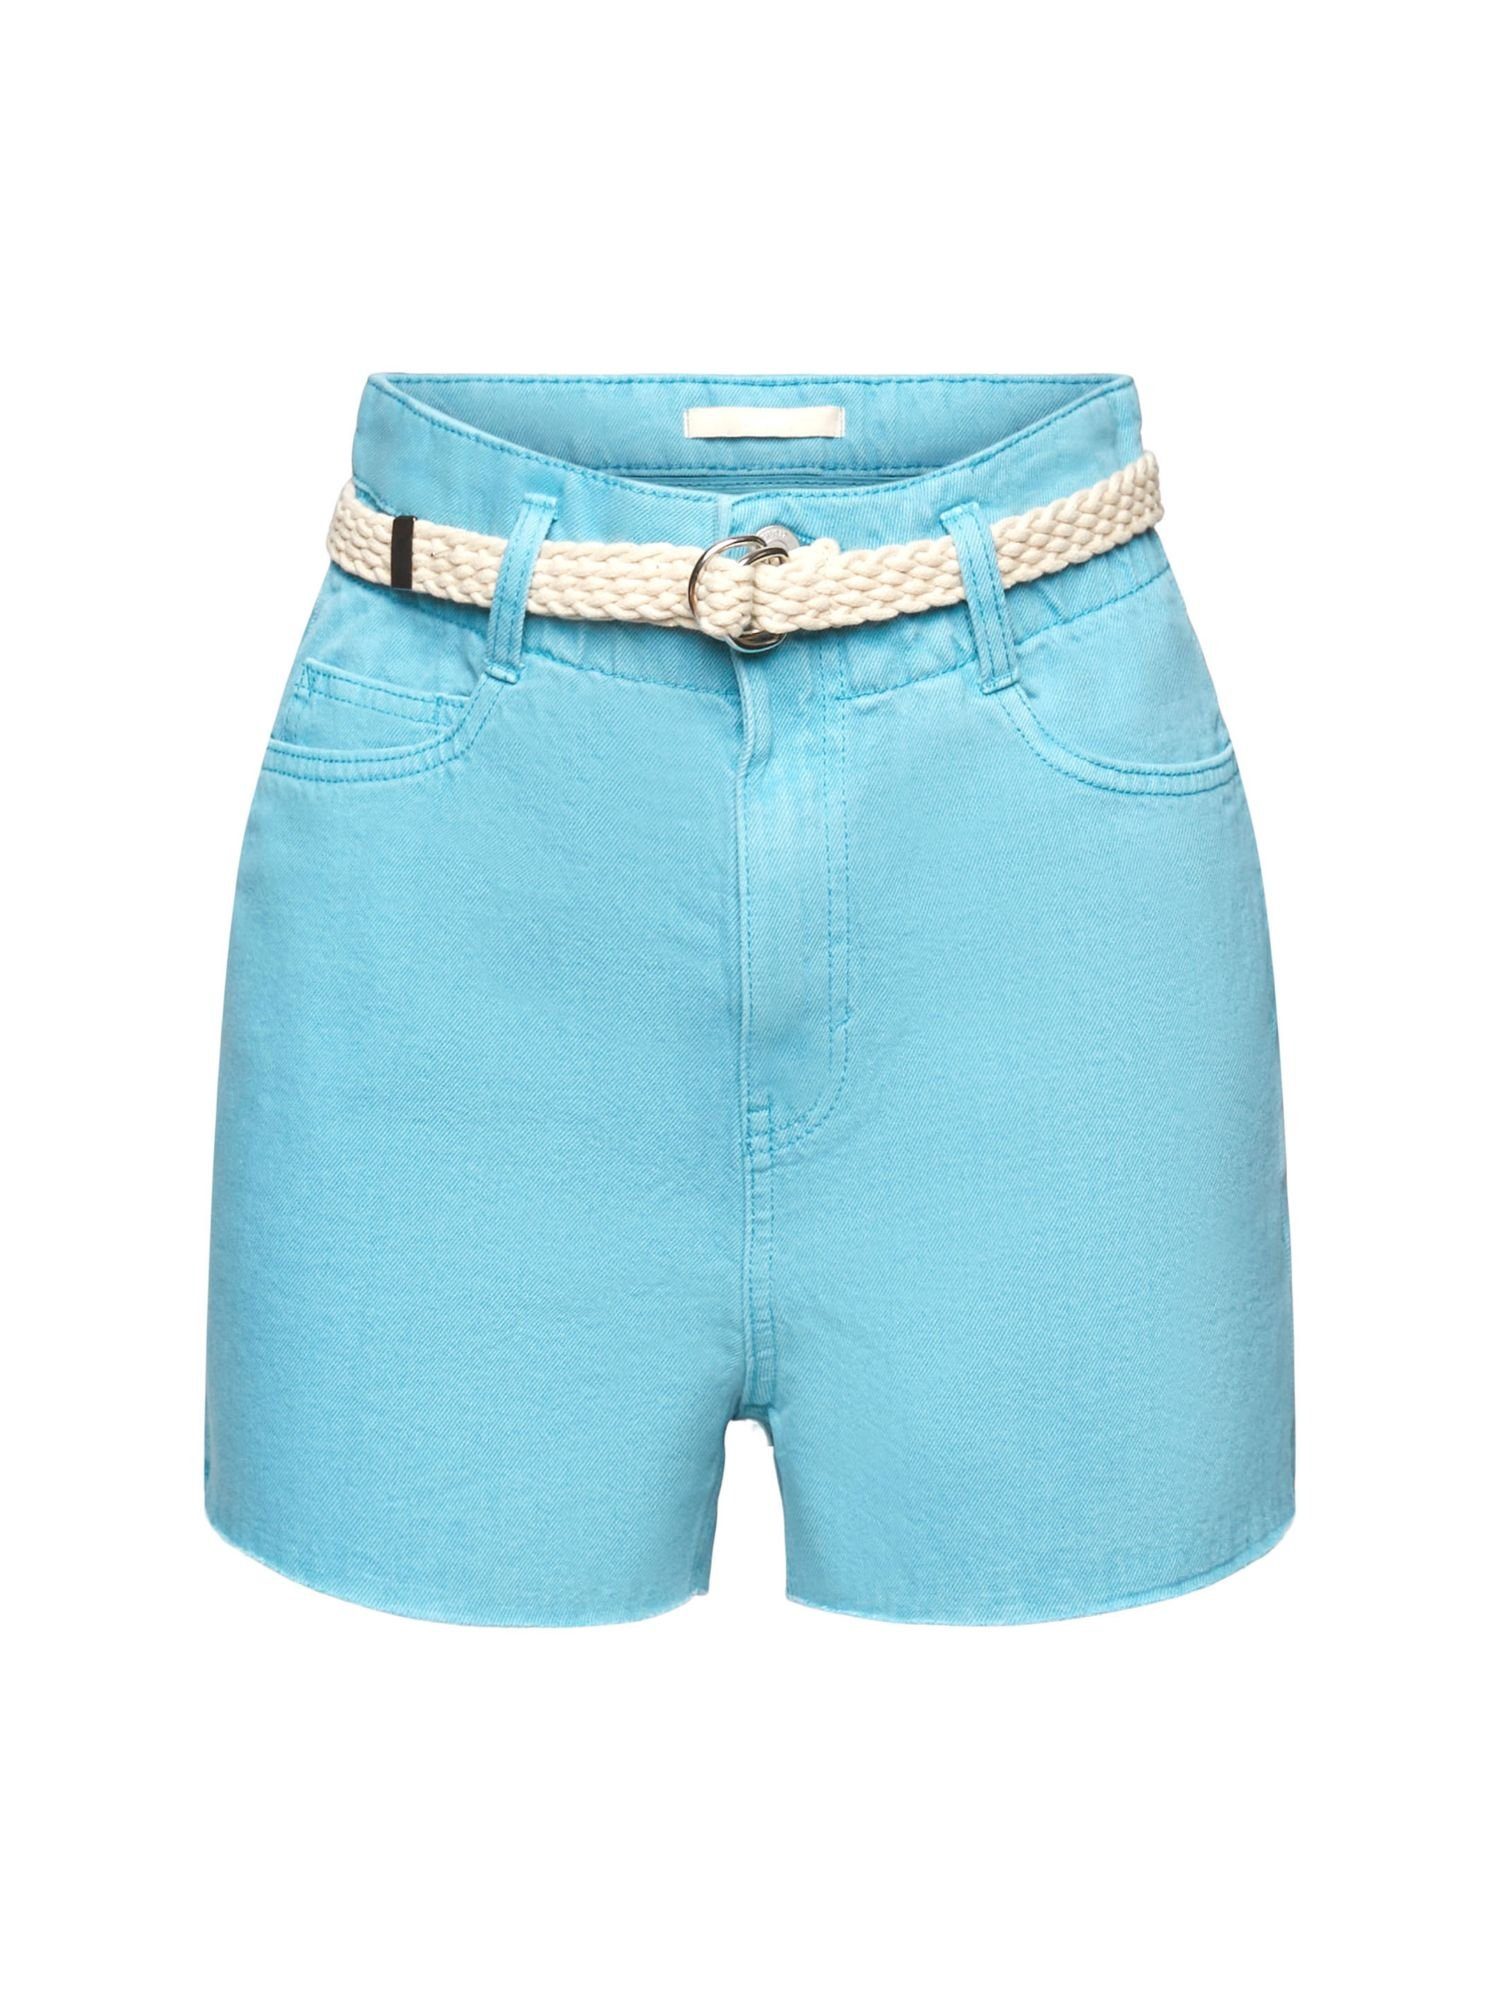 edc by TURQUOISE (1-tlg) Esprit Optik in Shorts abgeschnittener Jeansshorts